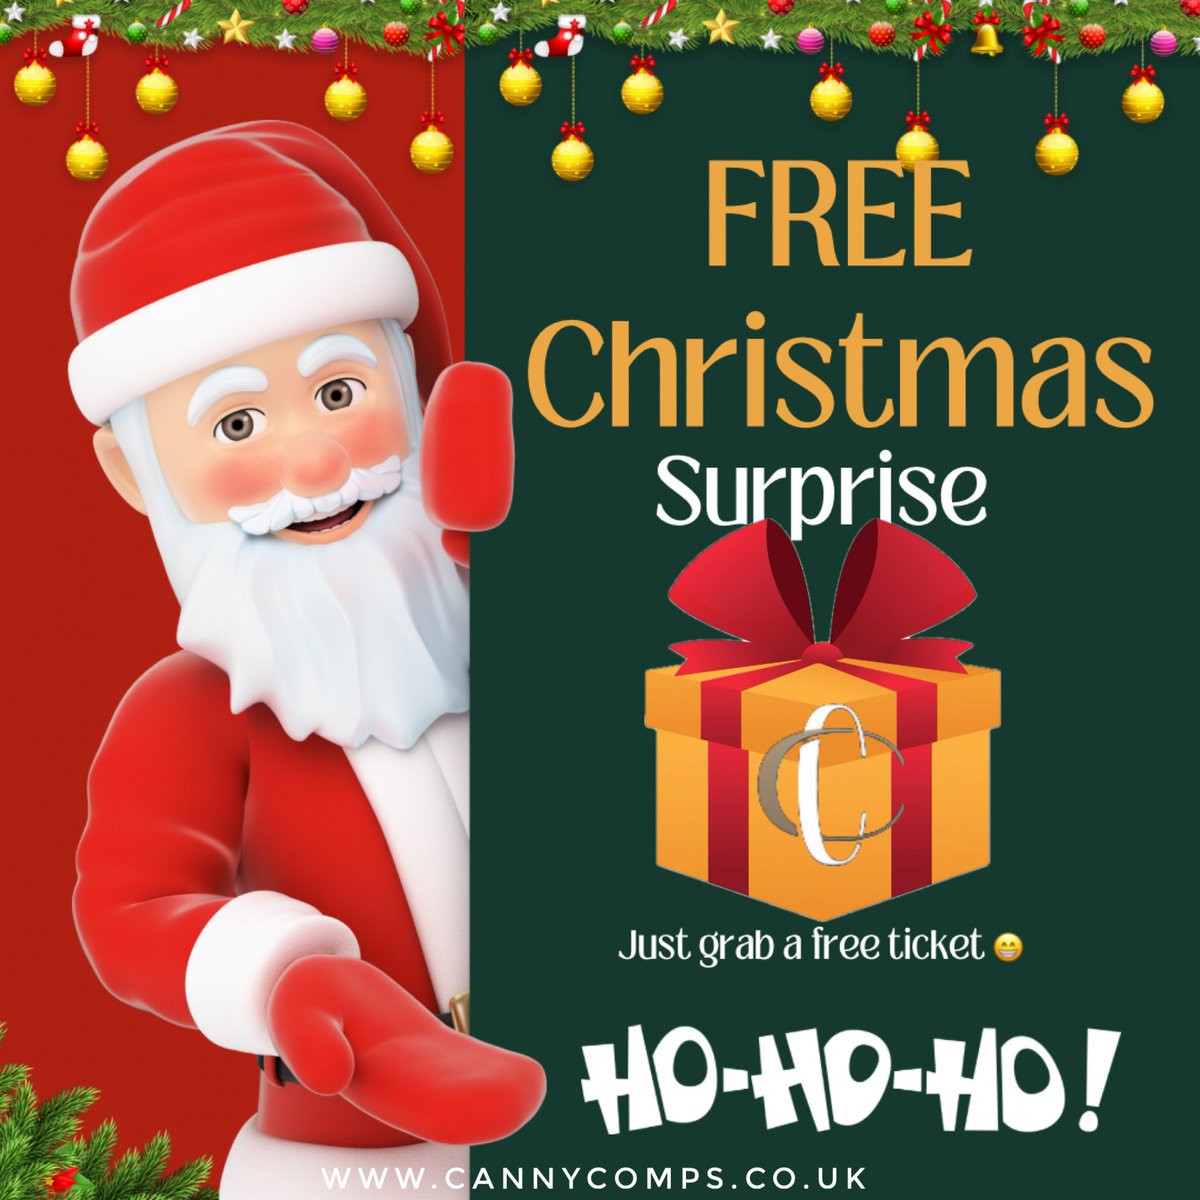 🎅 FREEBIE ALERT 🎅
Ya gotta love Santa, he’s still wanting to empty his sack 😱
Free surprise gift and limited entries so be quick 🤩
Link above ⬆️ 
#freegifts #freecompetition #cannycomps #freeprize